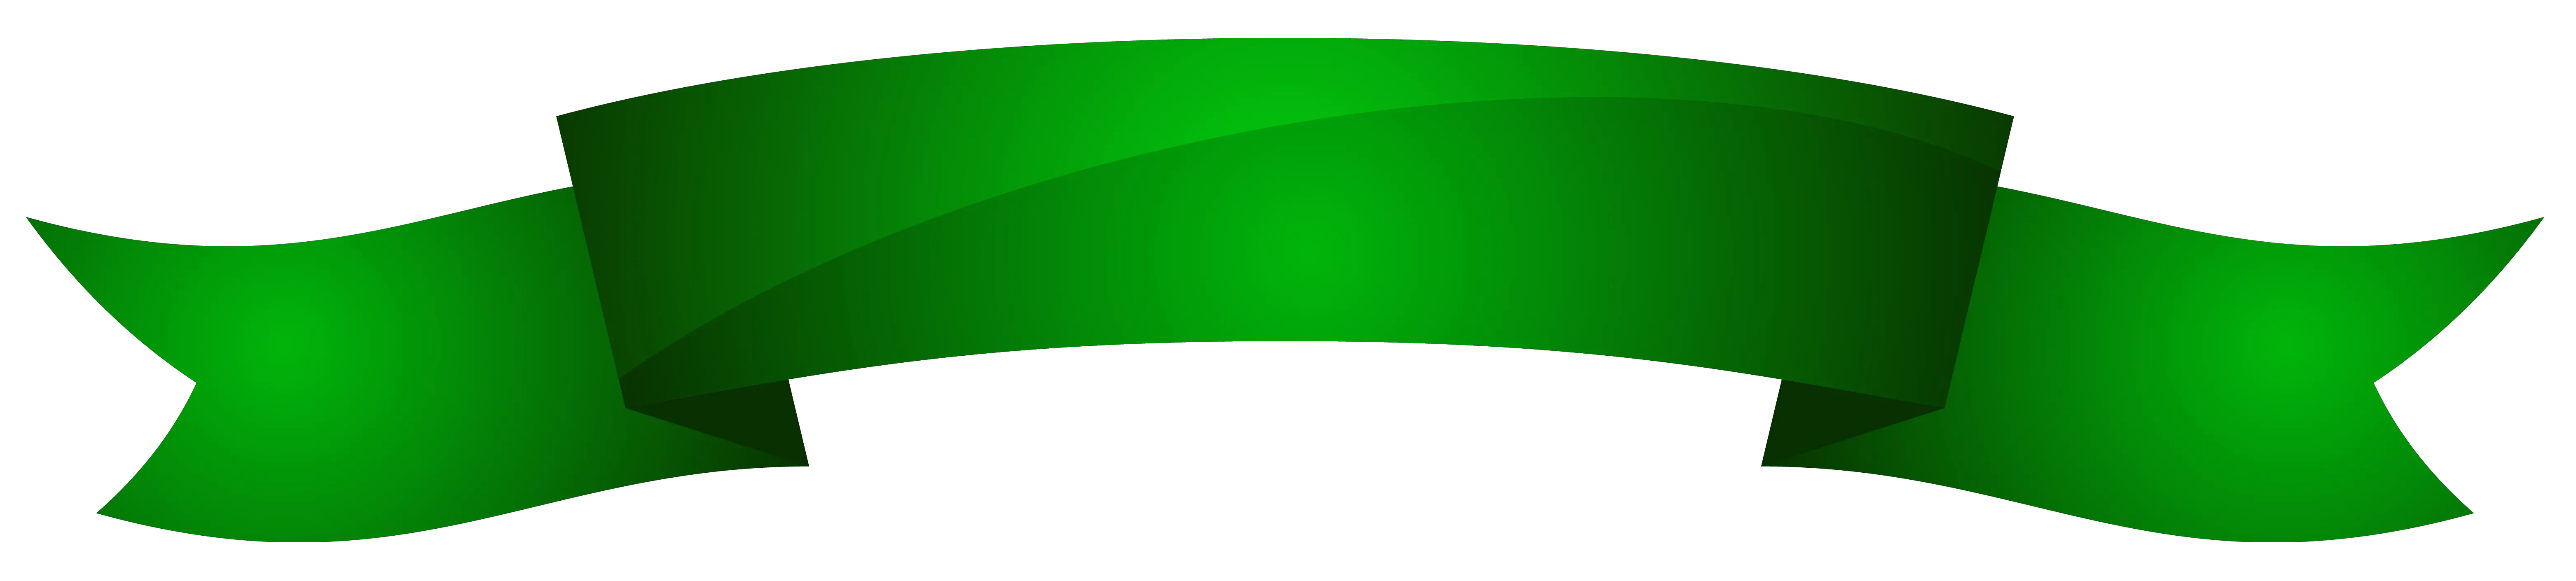 728x90 Banner Png